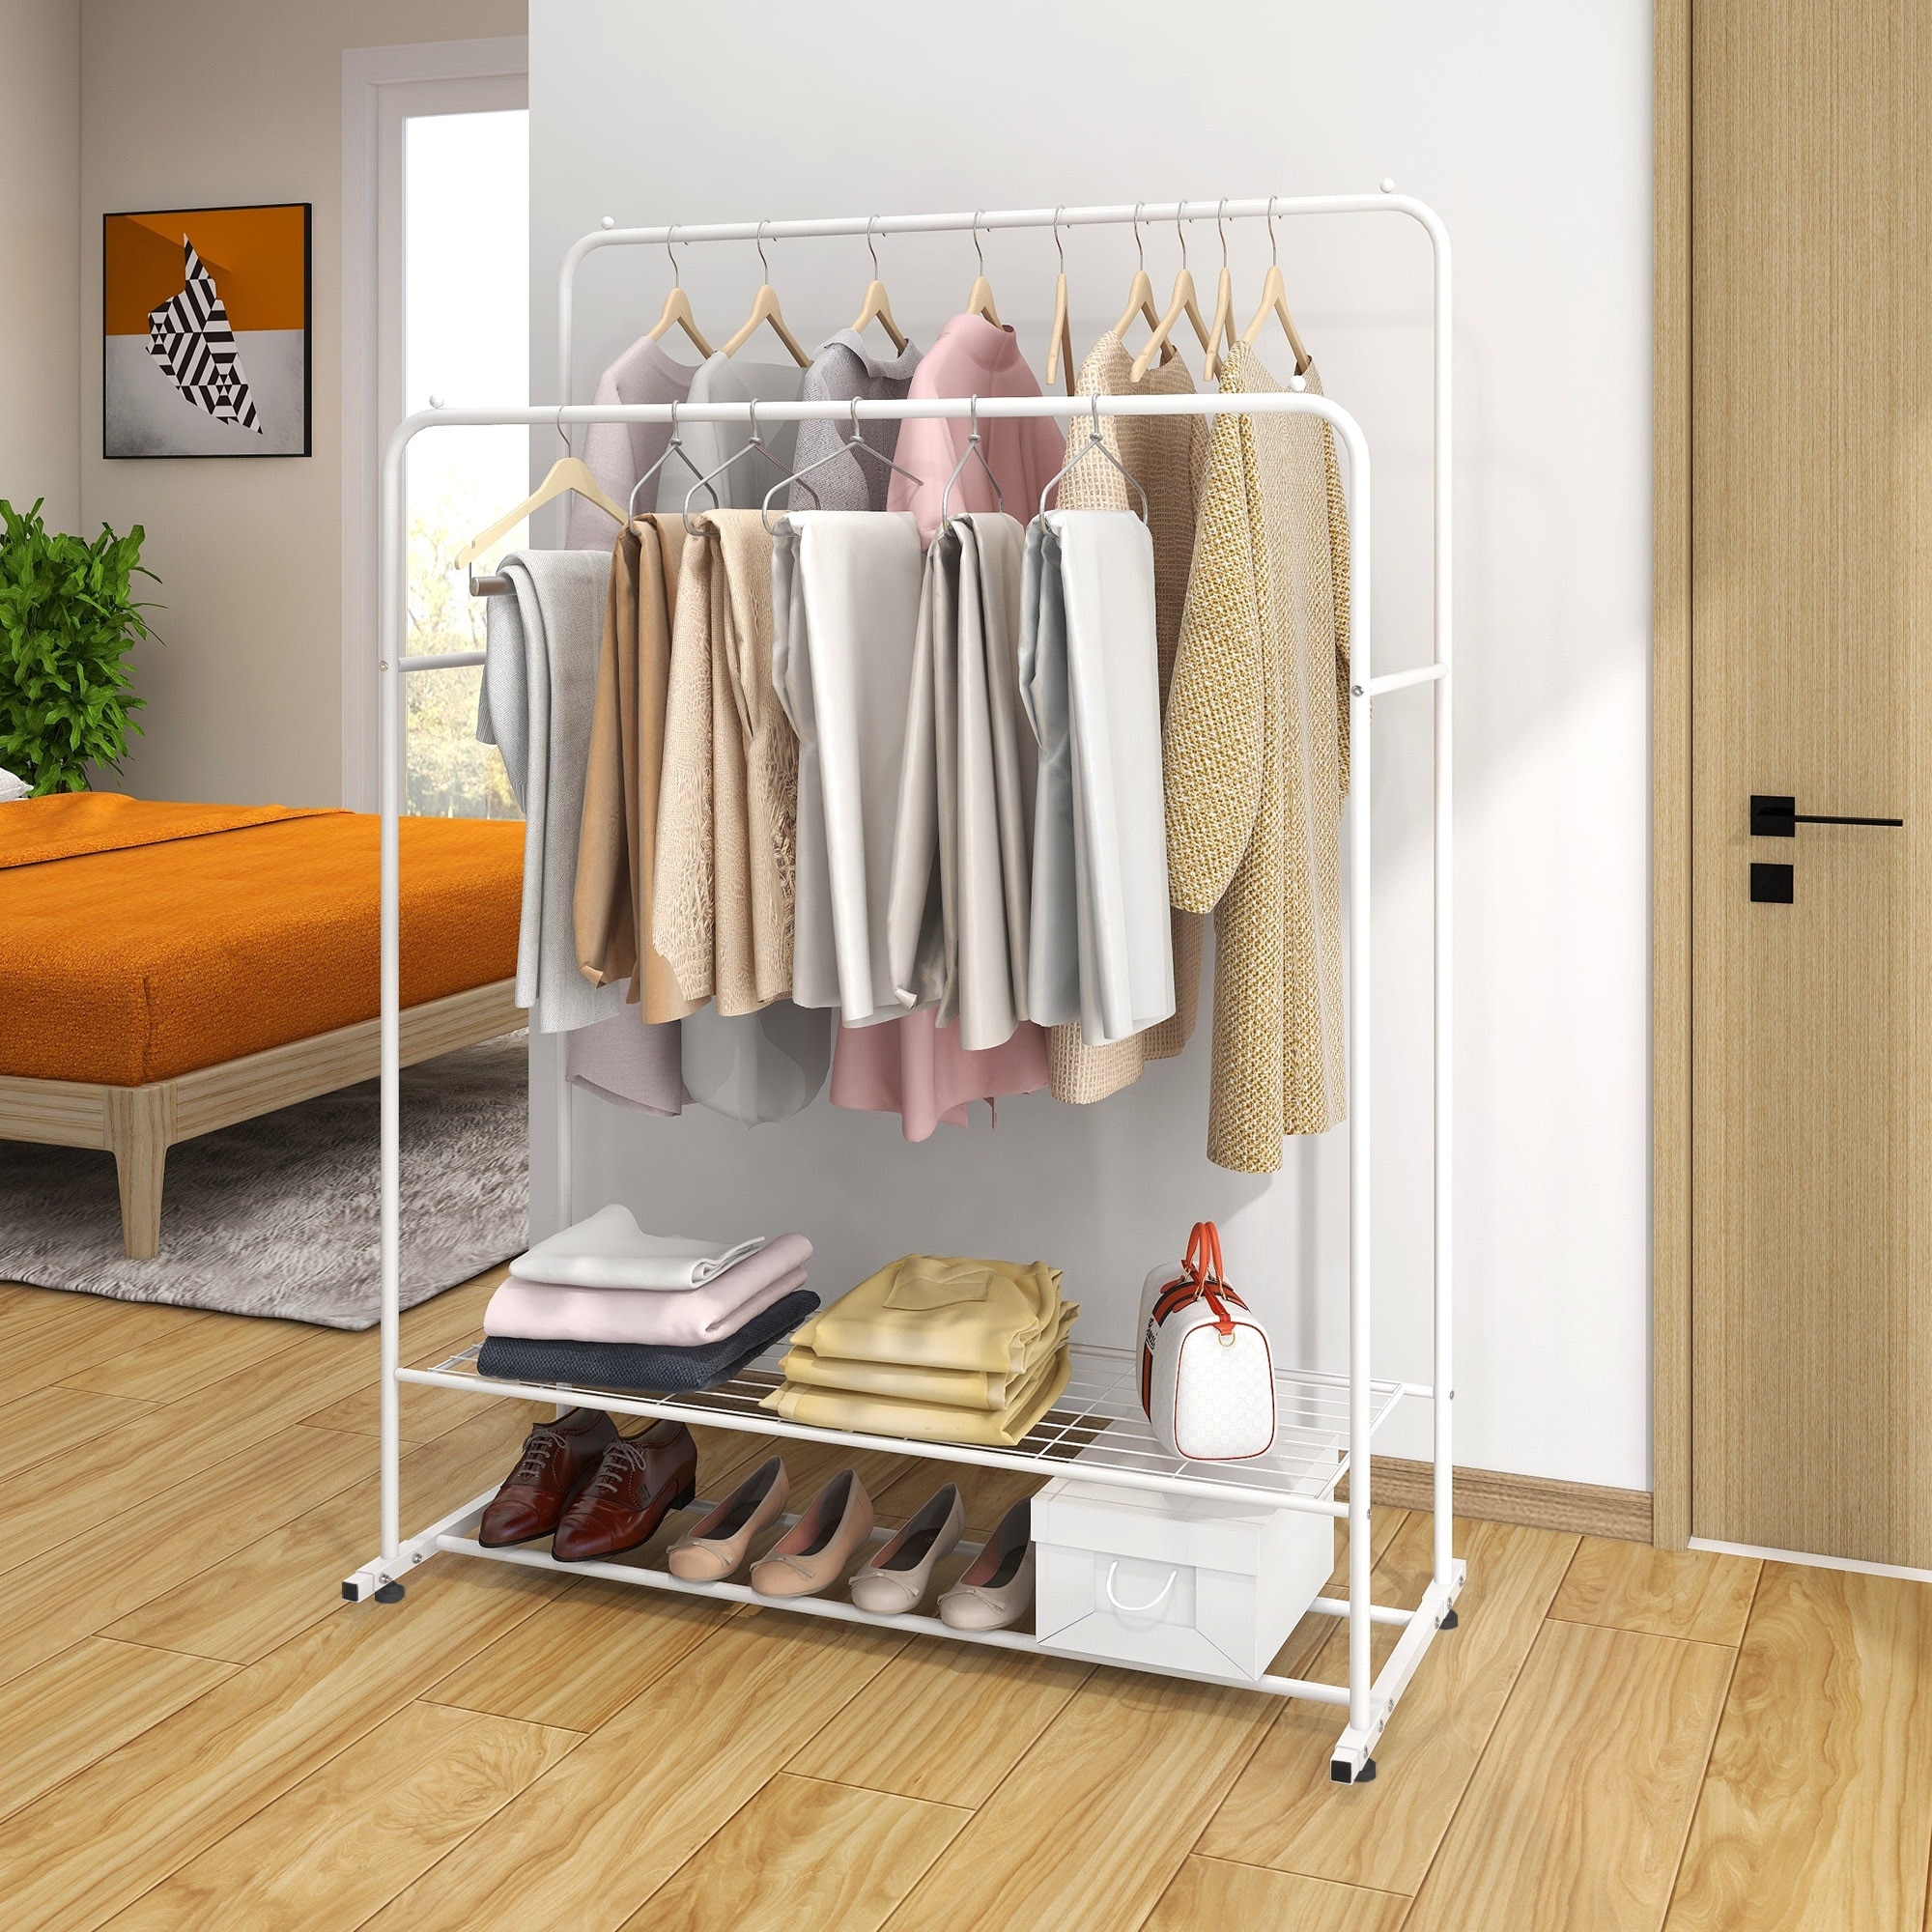 https://ak1.ostkcdn.com/images/products/is/images/direct/aae980a1297890e08b191a350b7d5268059439bc/White-Metal-Free-Standing-Closet-Organizer-Double-Hanging-Rod-Clothes-Garment-Racks.jpg